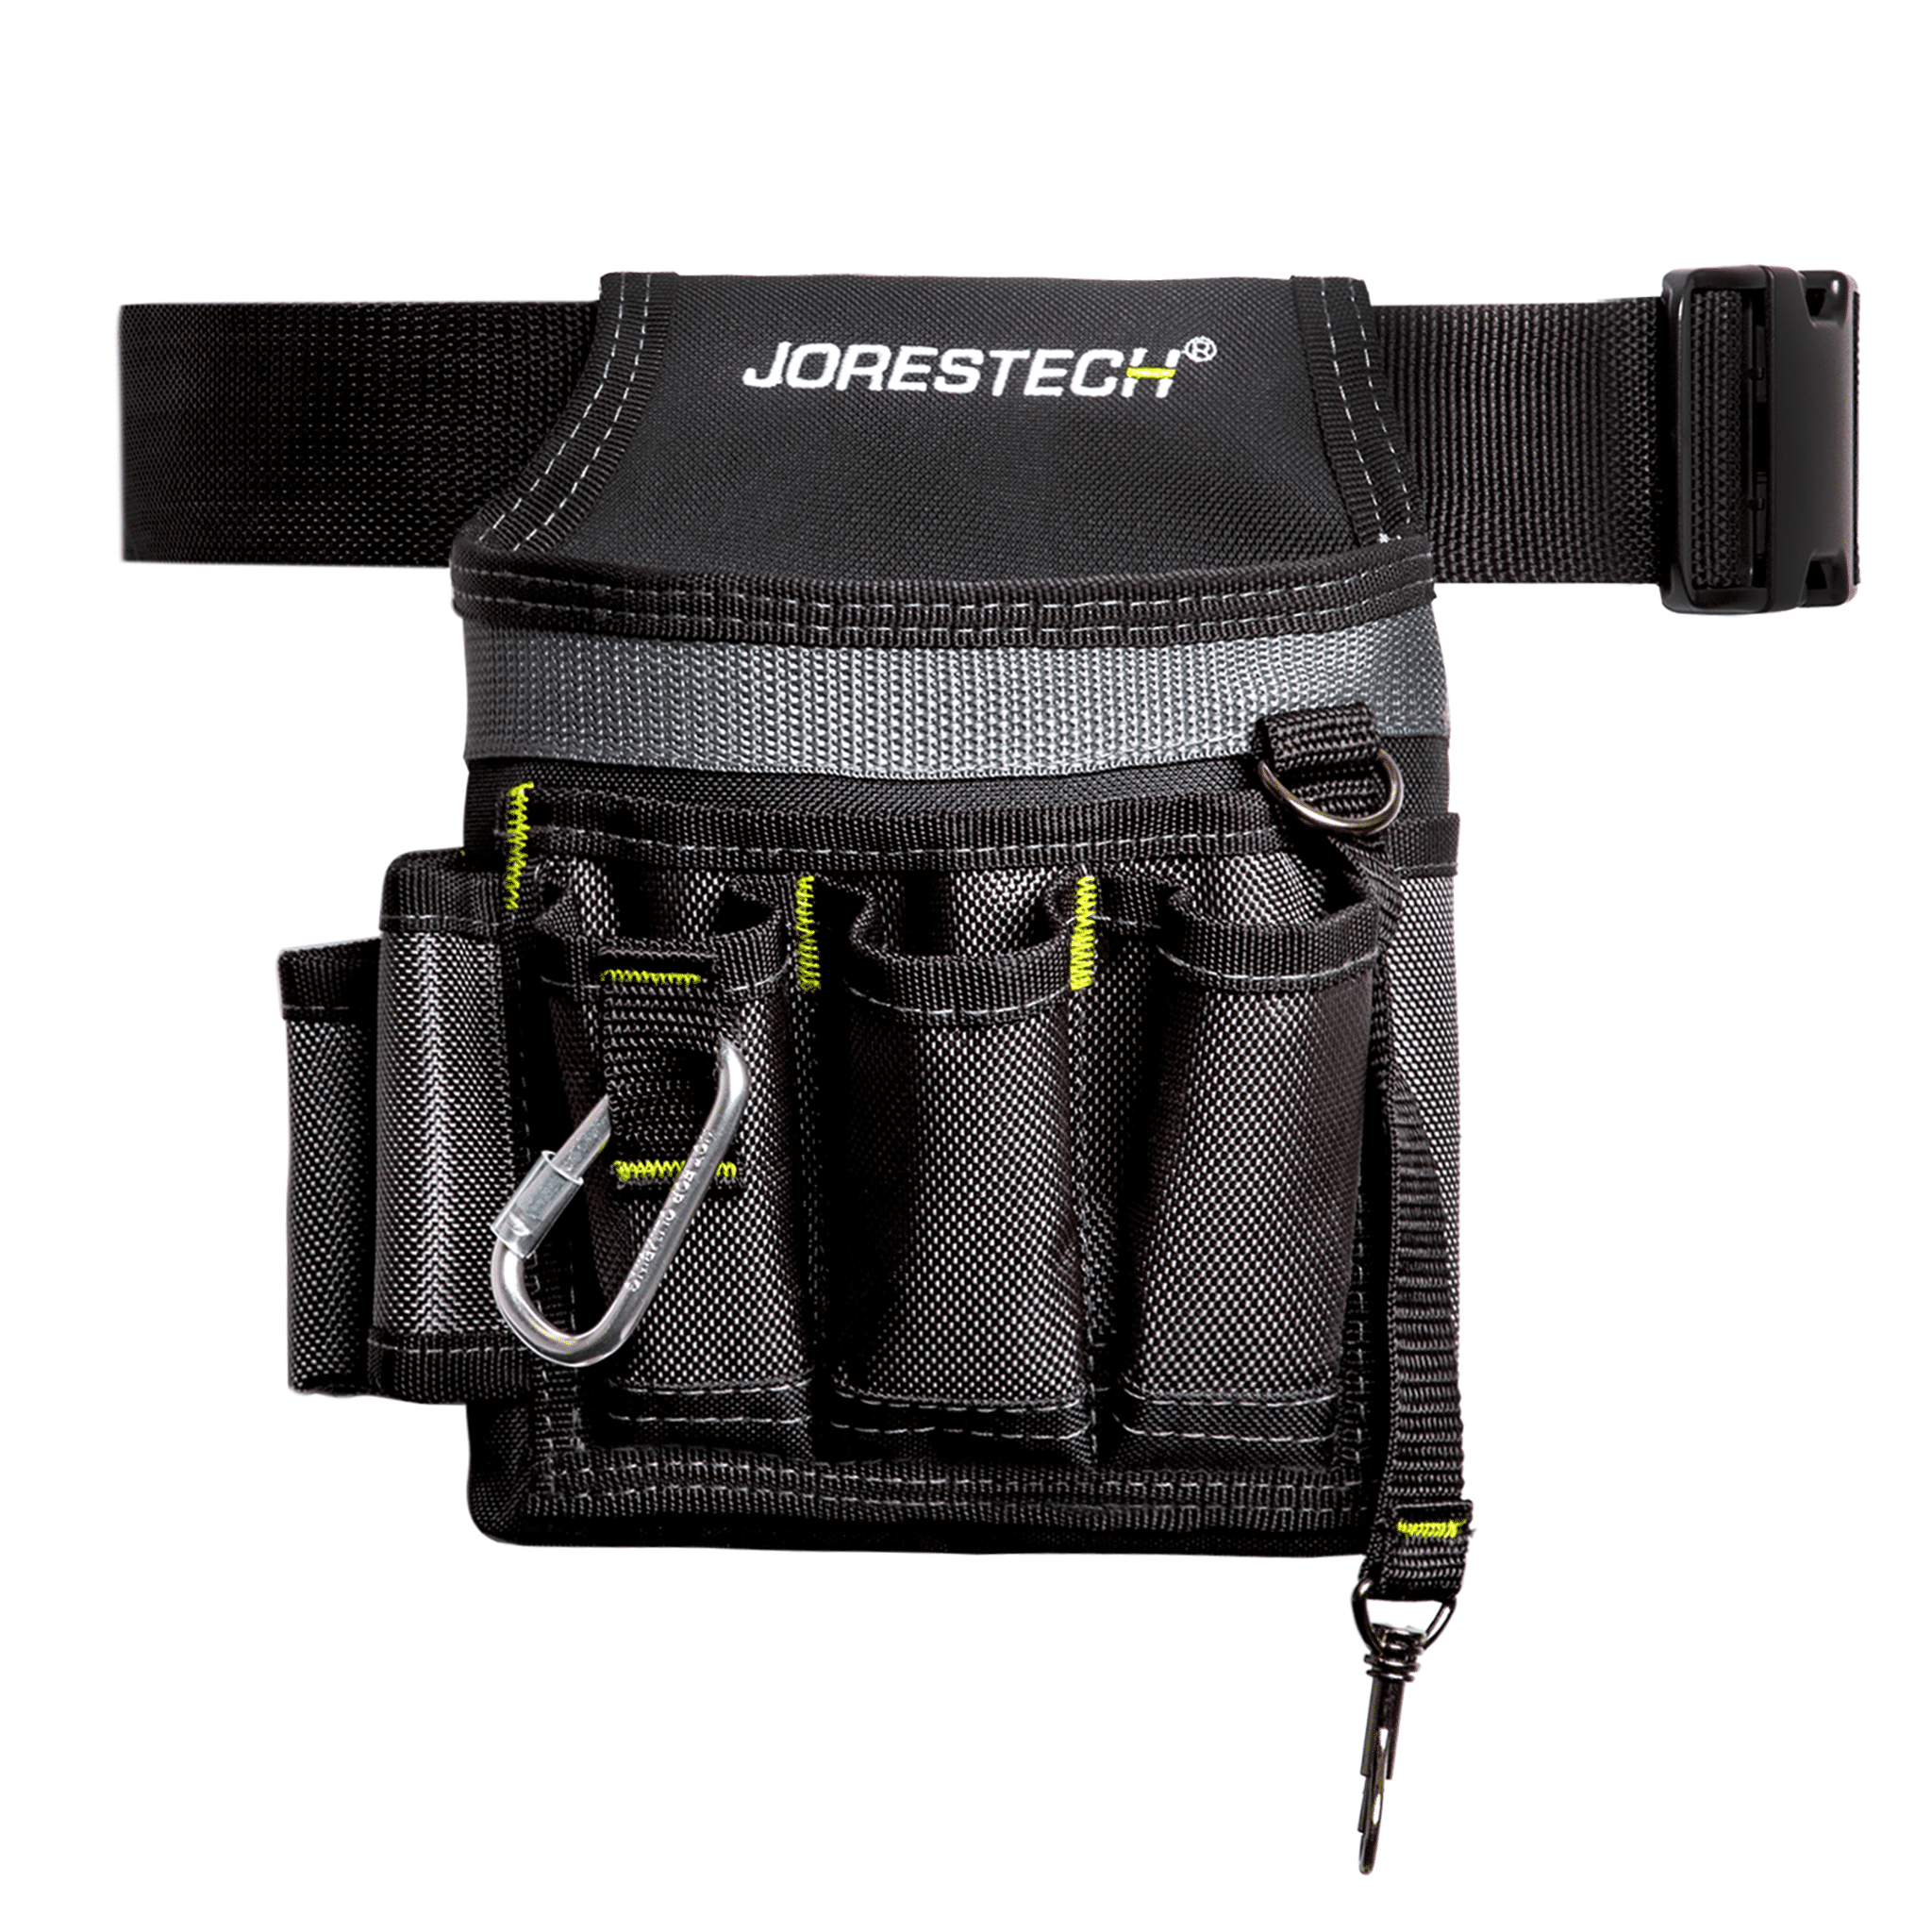 The 10 Best EDC Pouch Organizers – Finstock